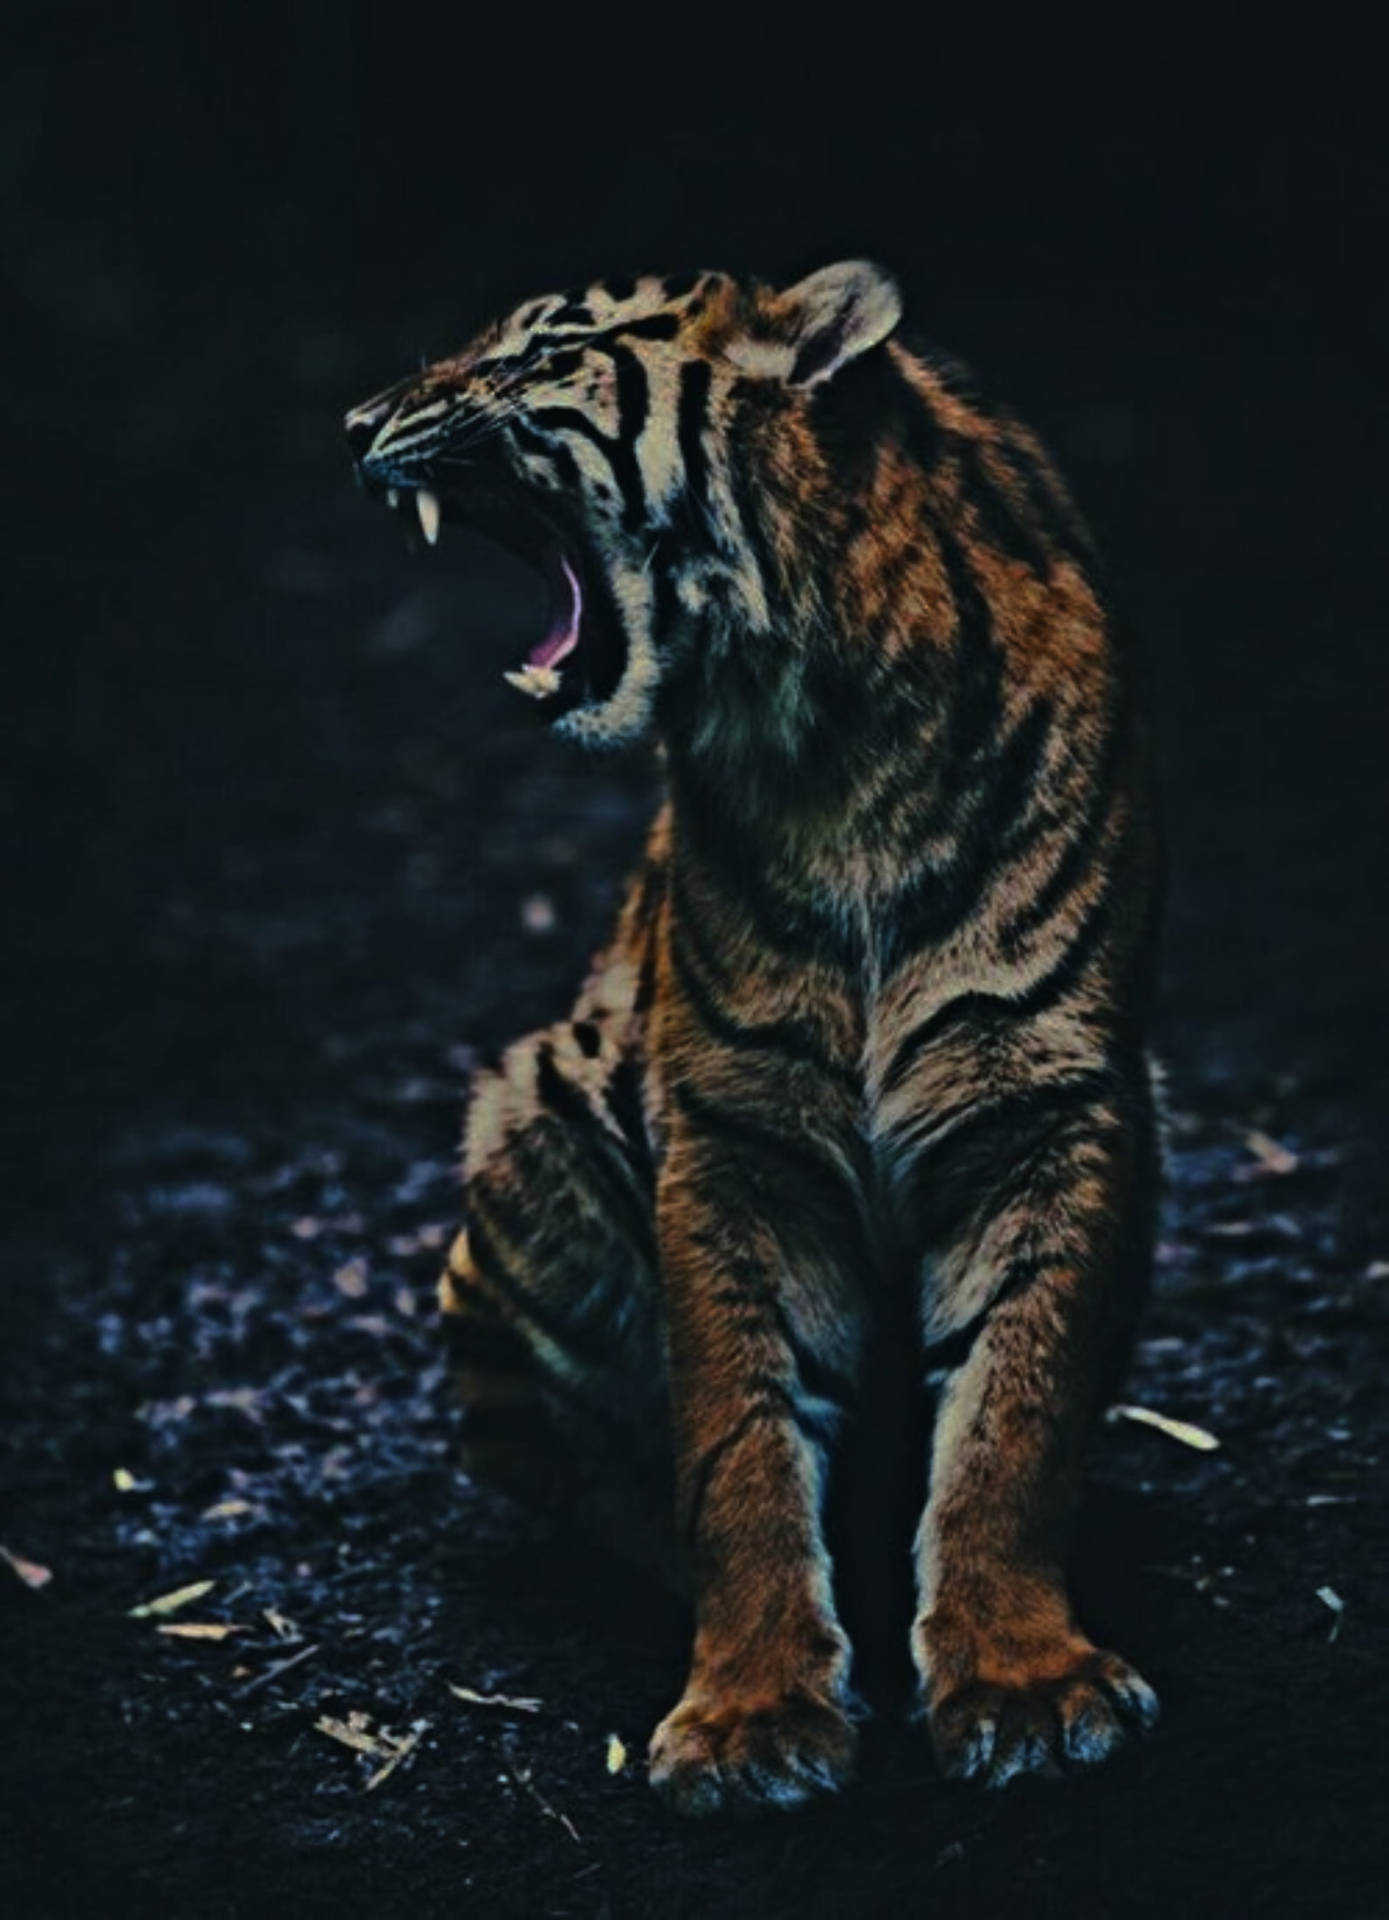 Growling Tiger With Black Tiger Stripes